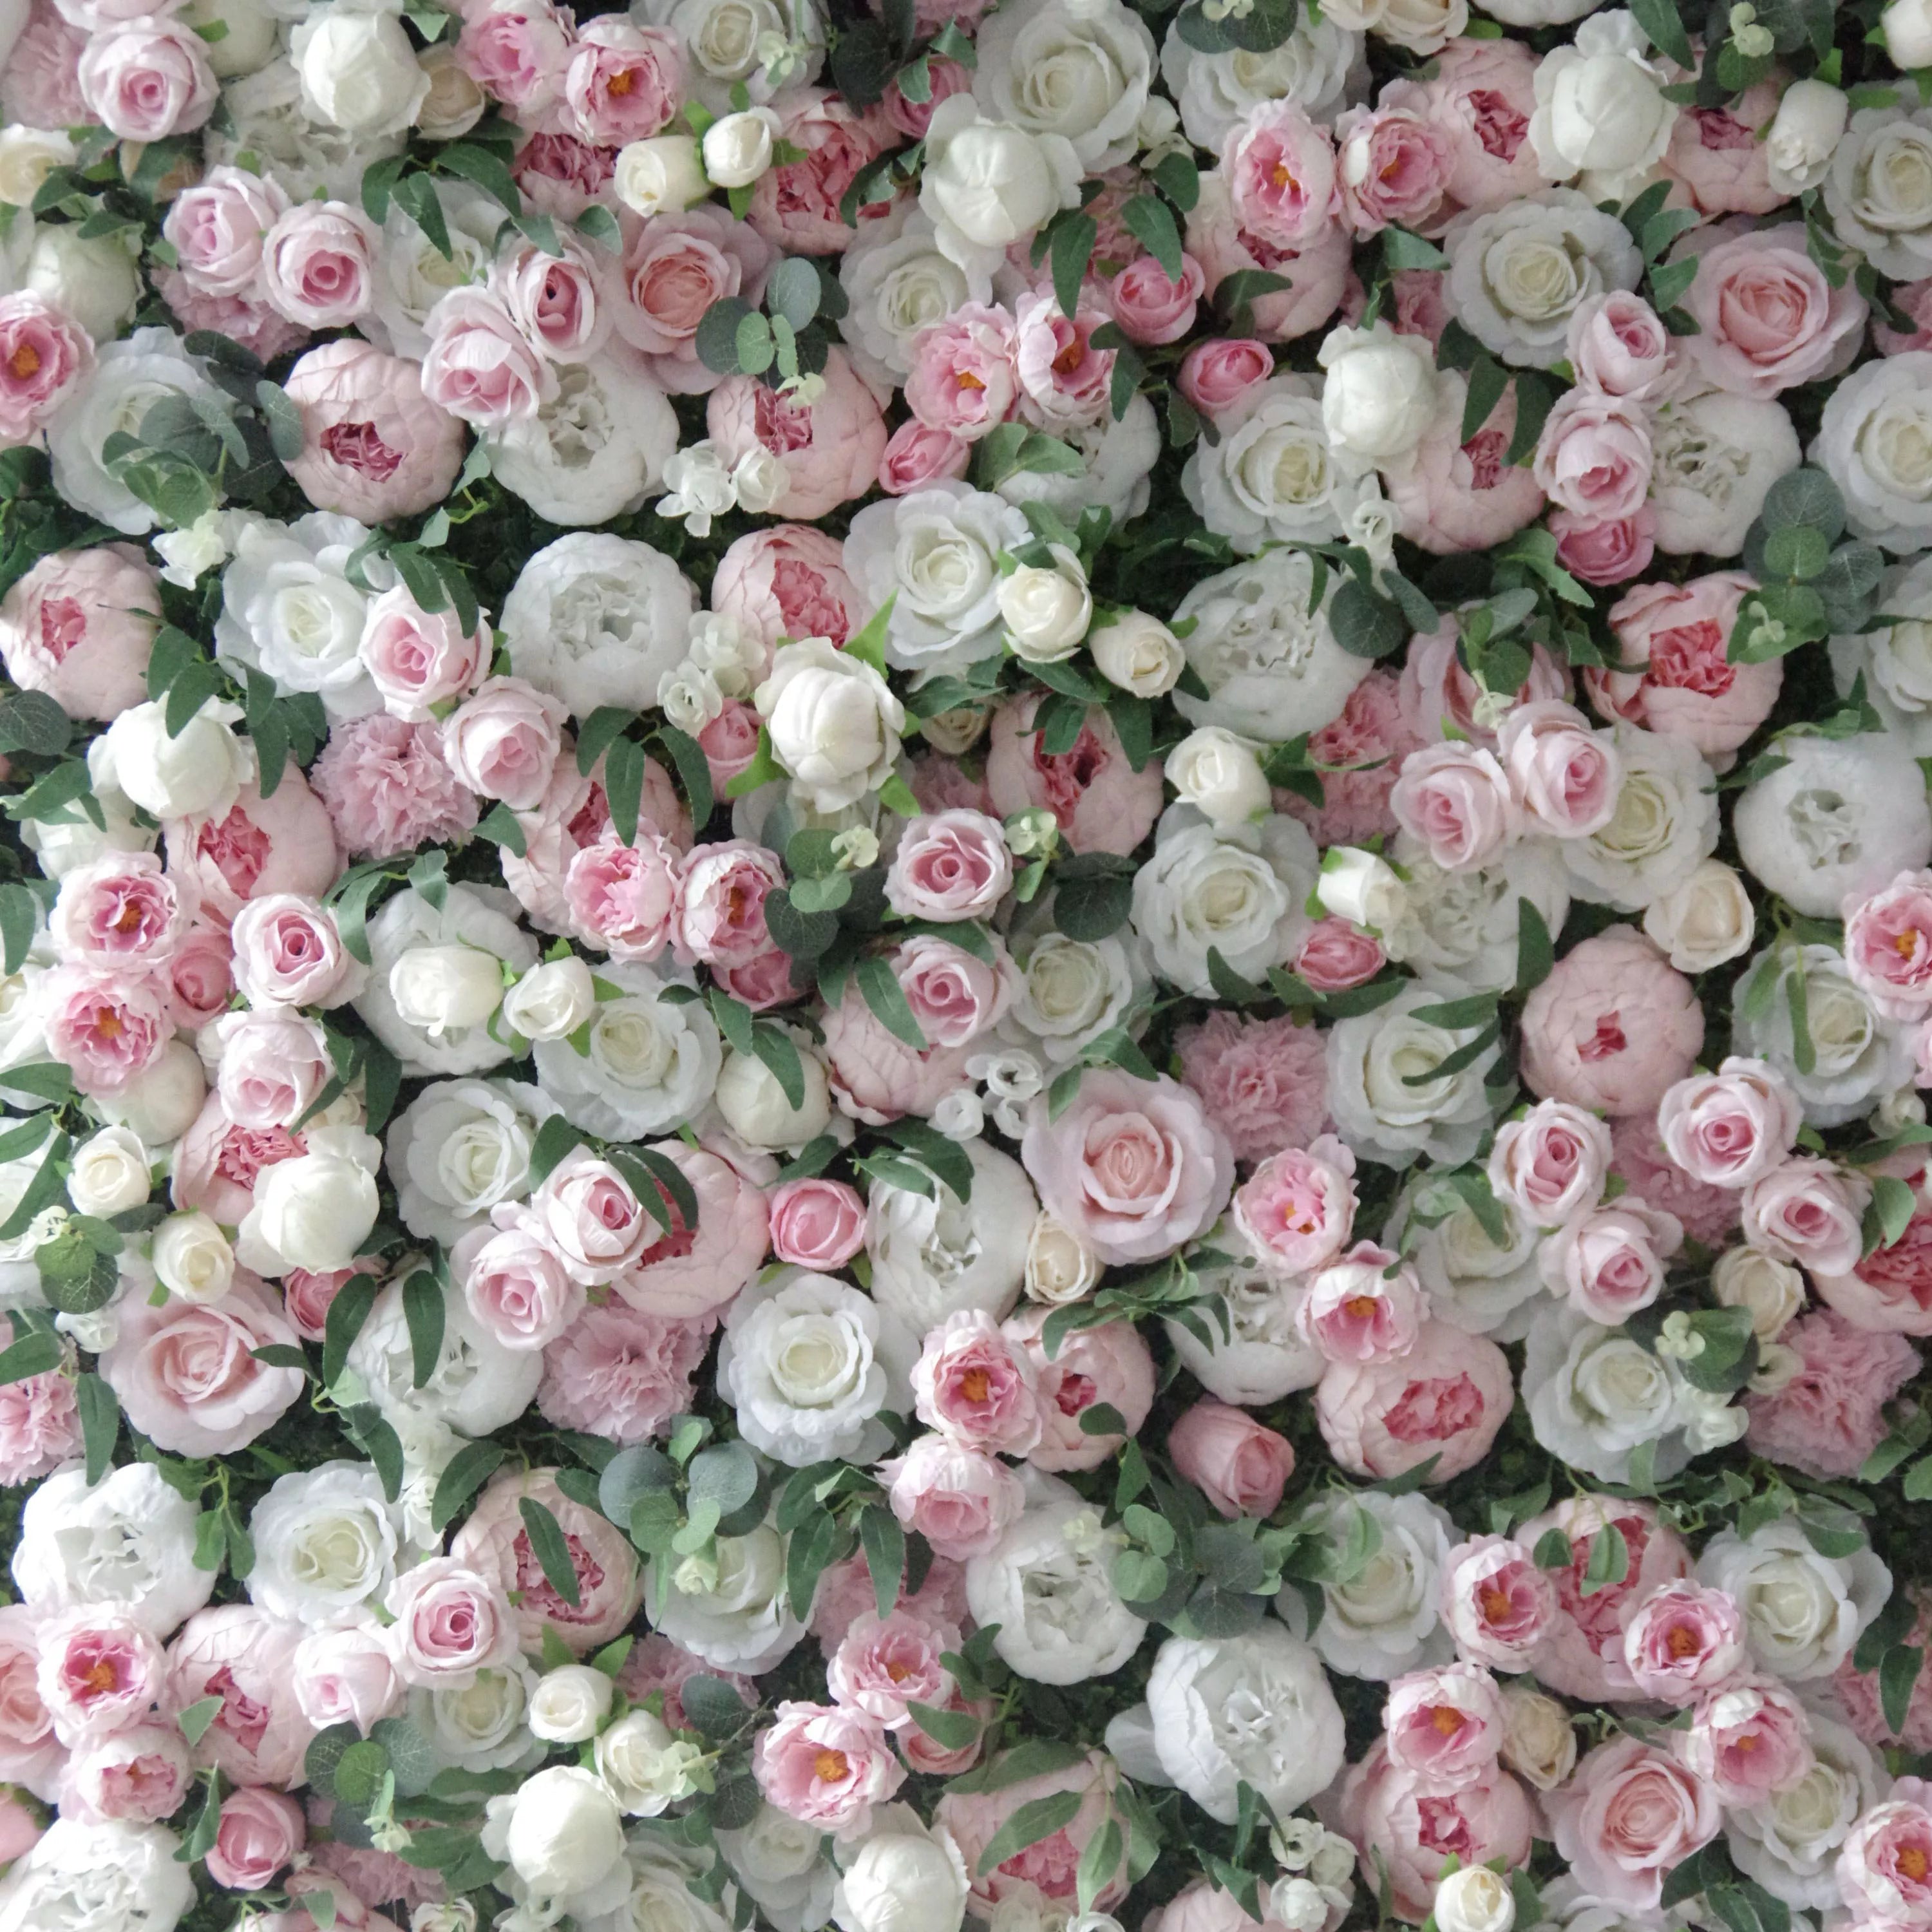 Valar Flowers Roll Up Fabric Artificial Mixed Pink and White Floral Wall for Wedding Backdrop, Floral Party Decor, Event Photography2